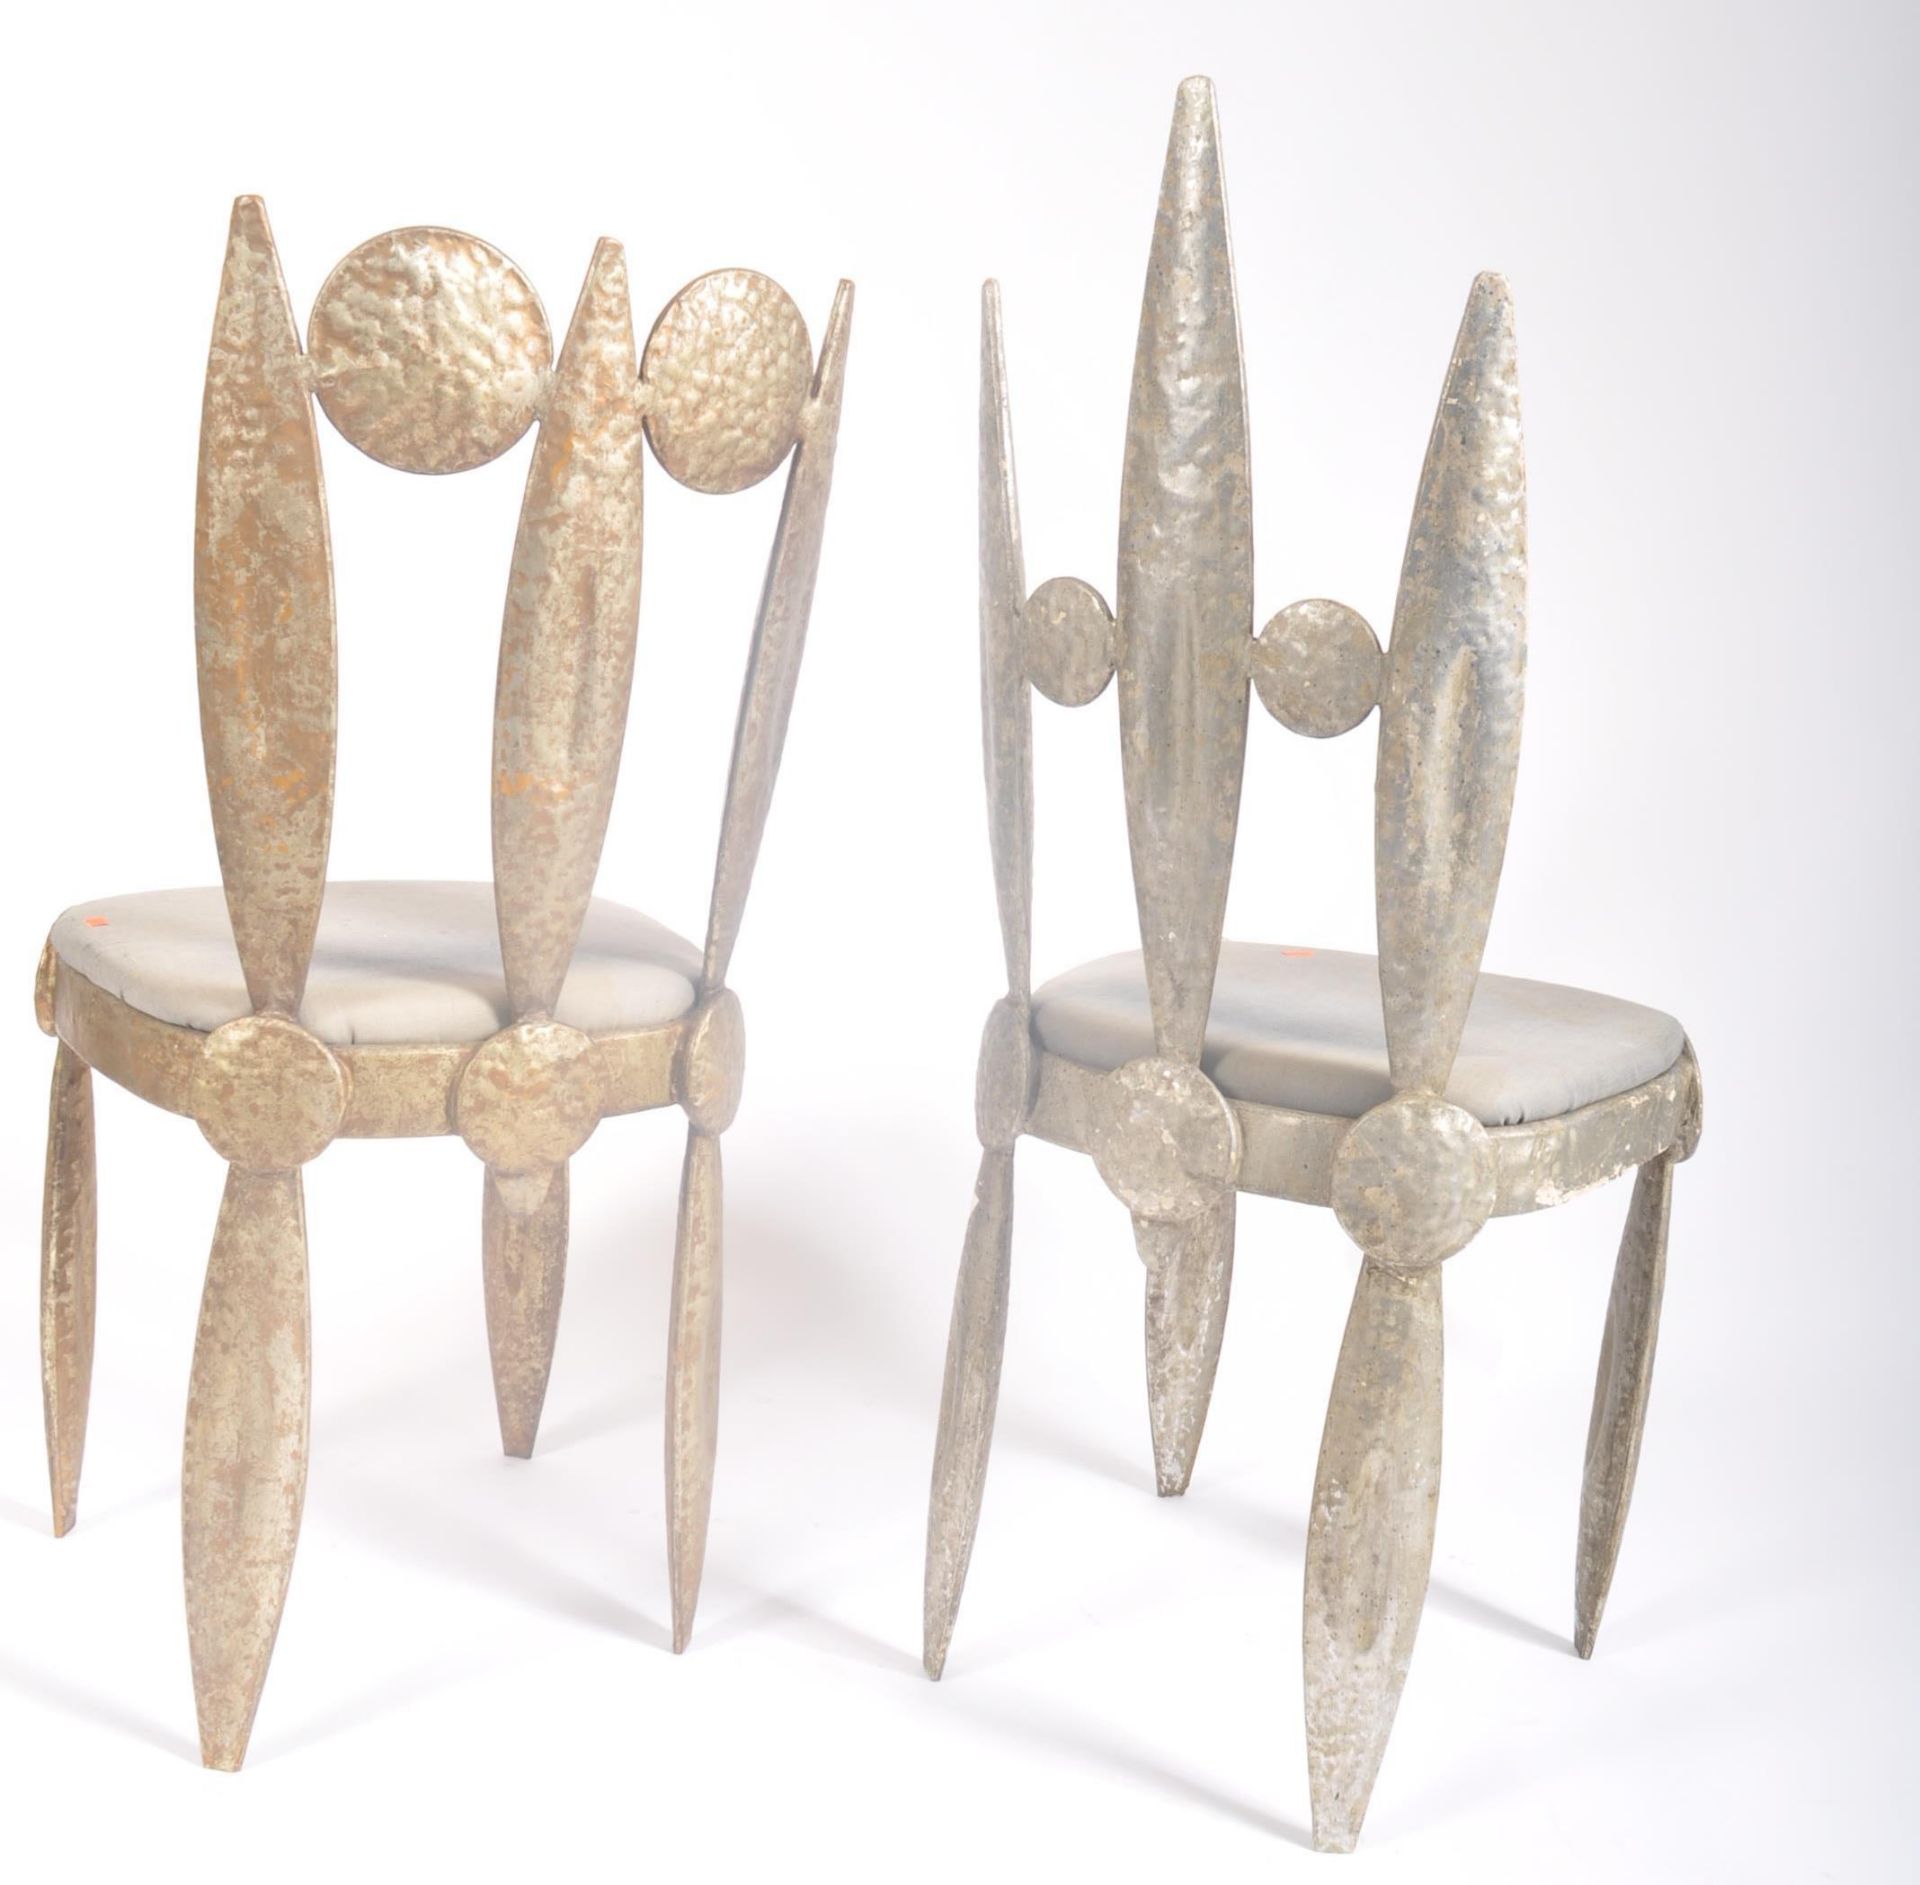 PAIR OF VINTAGE 1990S FRENCH NICOLAS BLANDIN IRON THRONE CHAIRS - Image 5 of 5